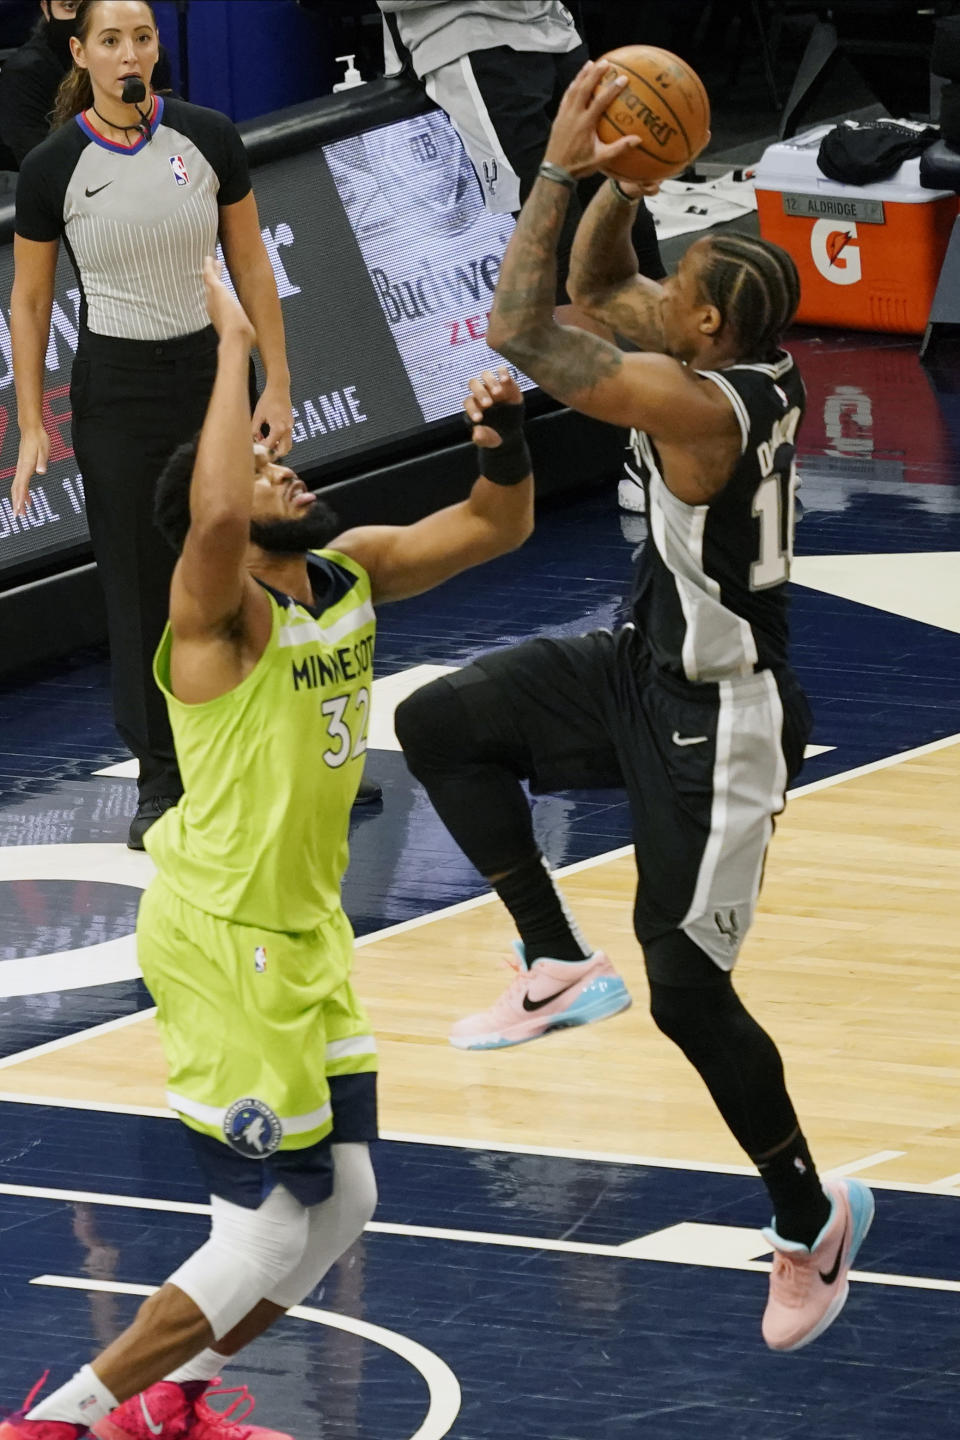 San Antonio Spurs' DeMar DeRozan, right, shoots over Minnesota Timberwolves' Karl-Anthony Towns in the second half of an NBA basketball game Saturday, Jan. 9, 2021, in Minneapolis. (AP Photo/Jim Mone)